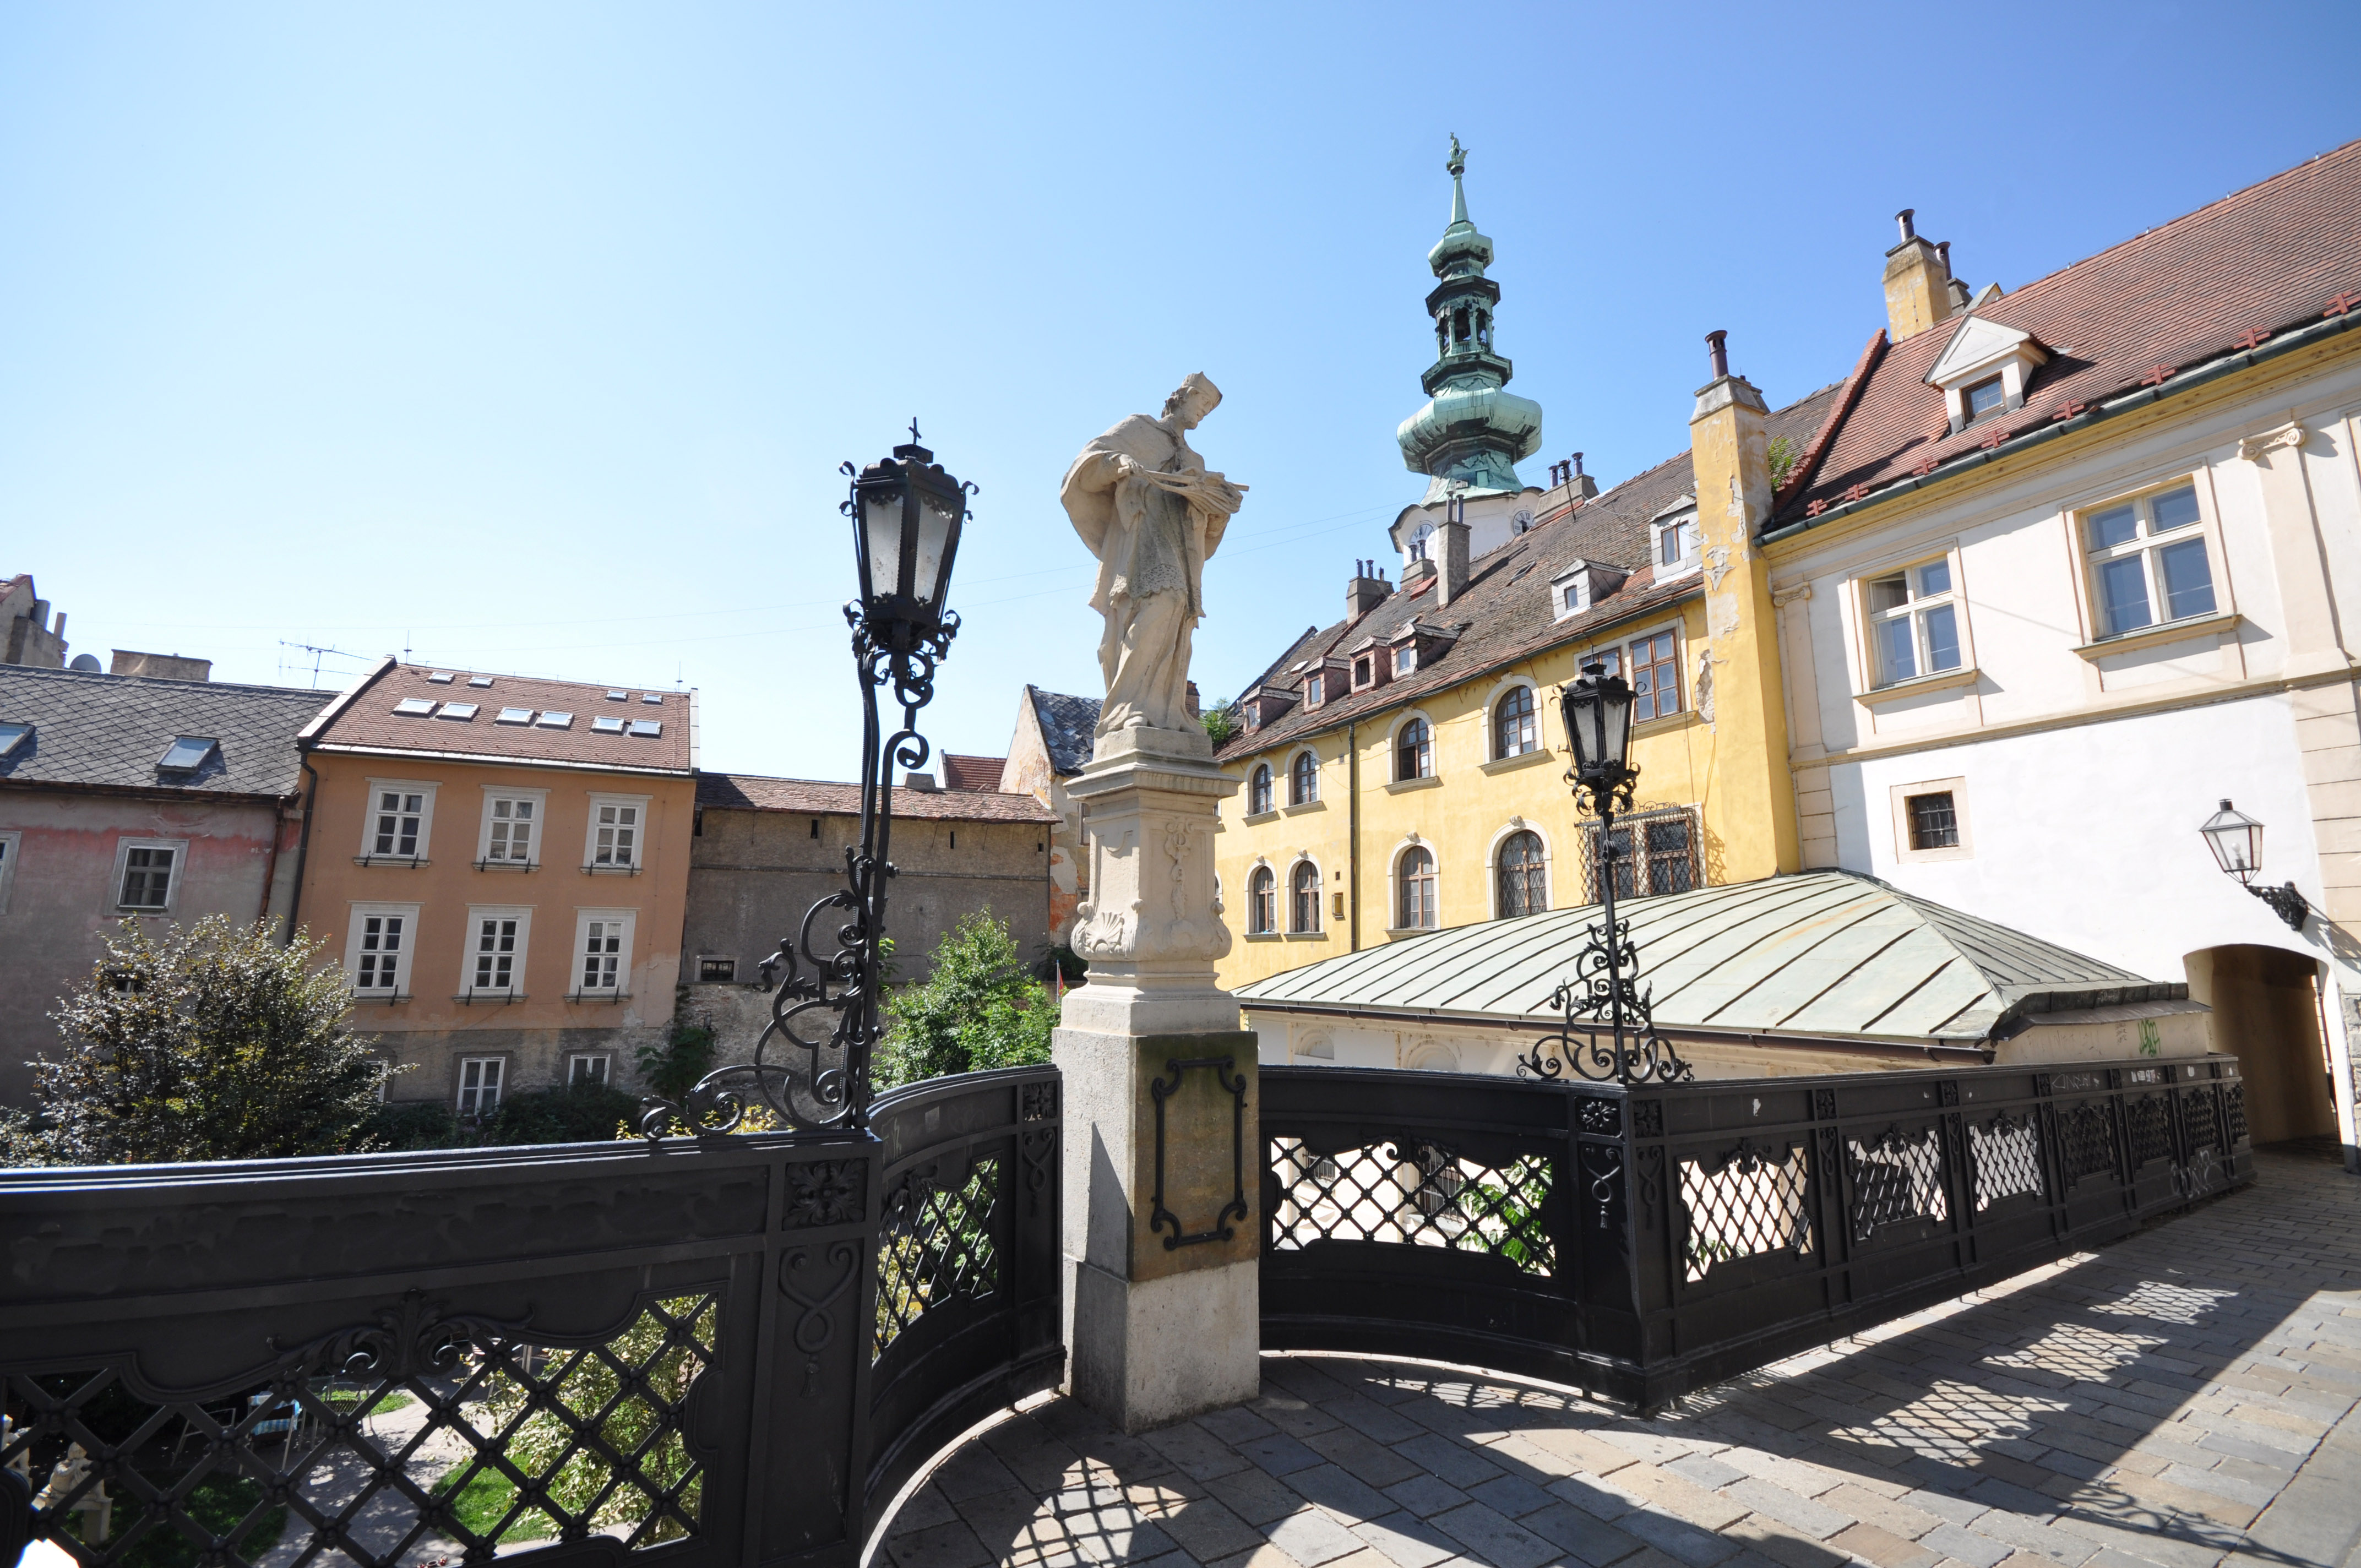 File:The Old Town of Bratislava (10267450365).jpg - Wikimedia Commons